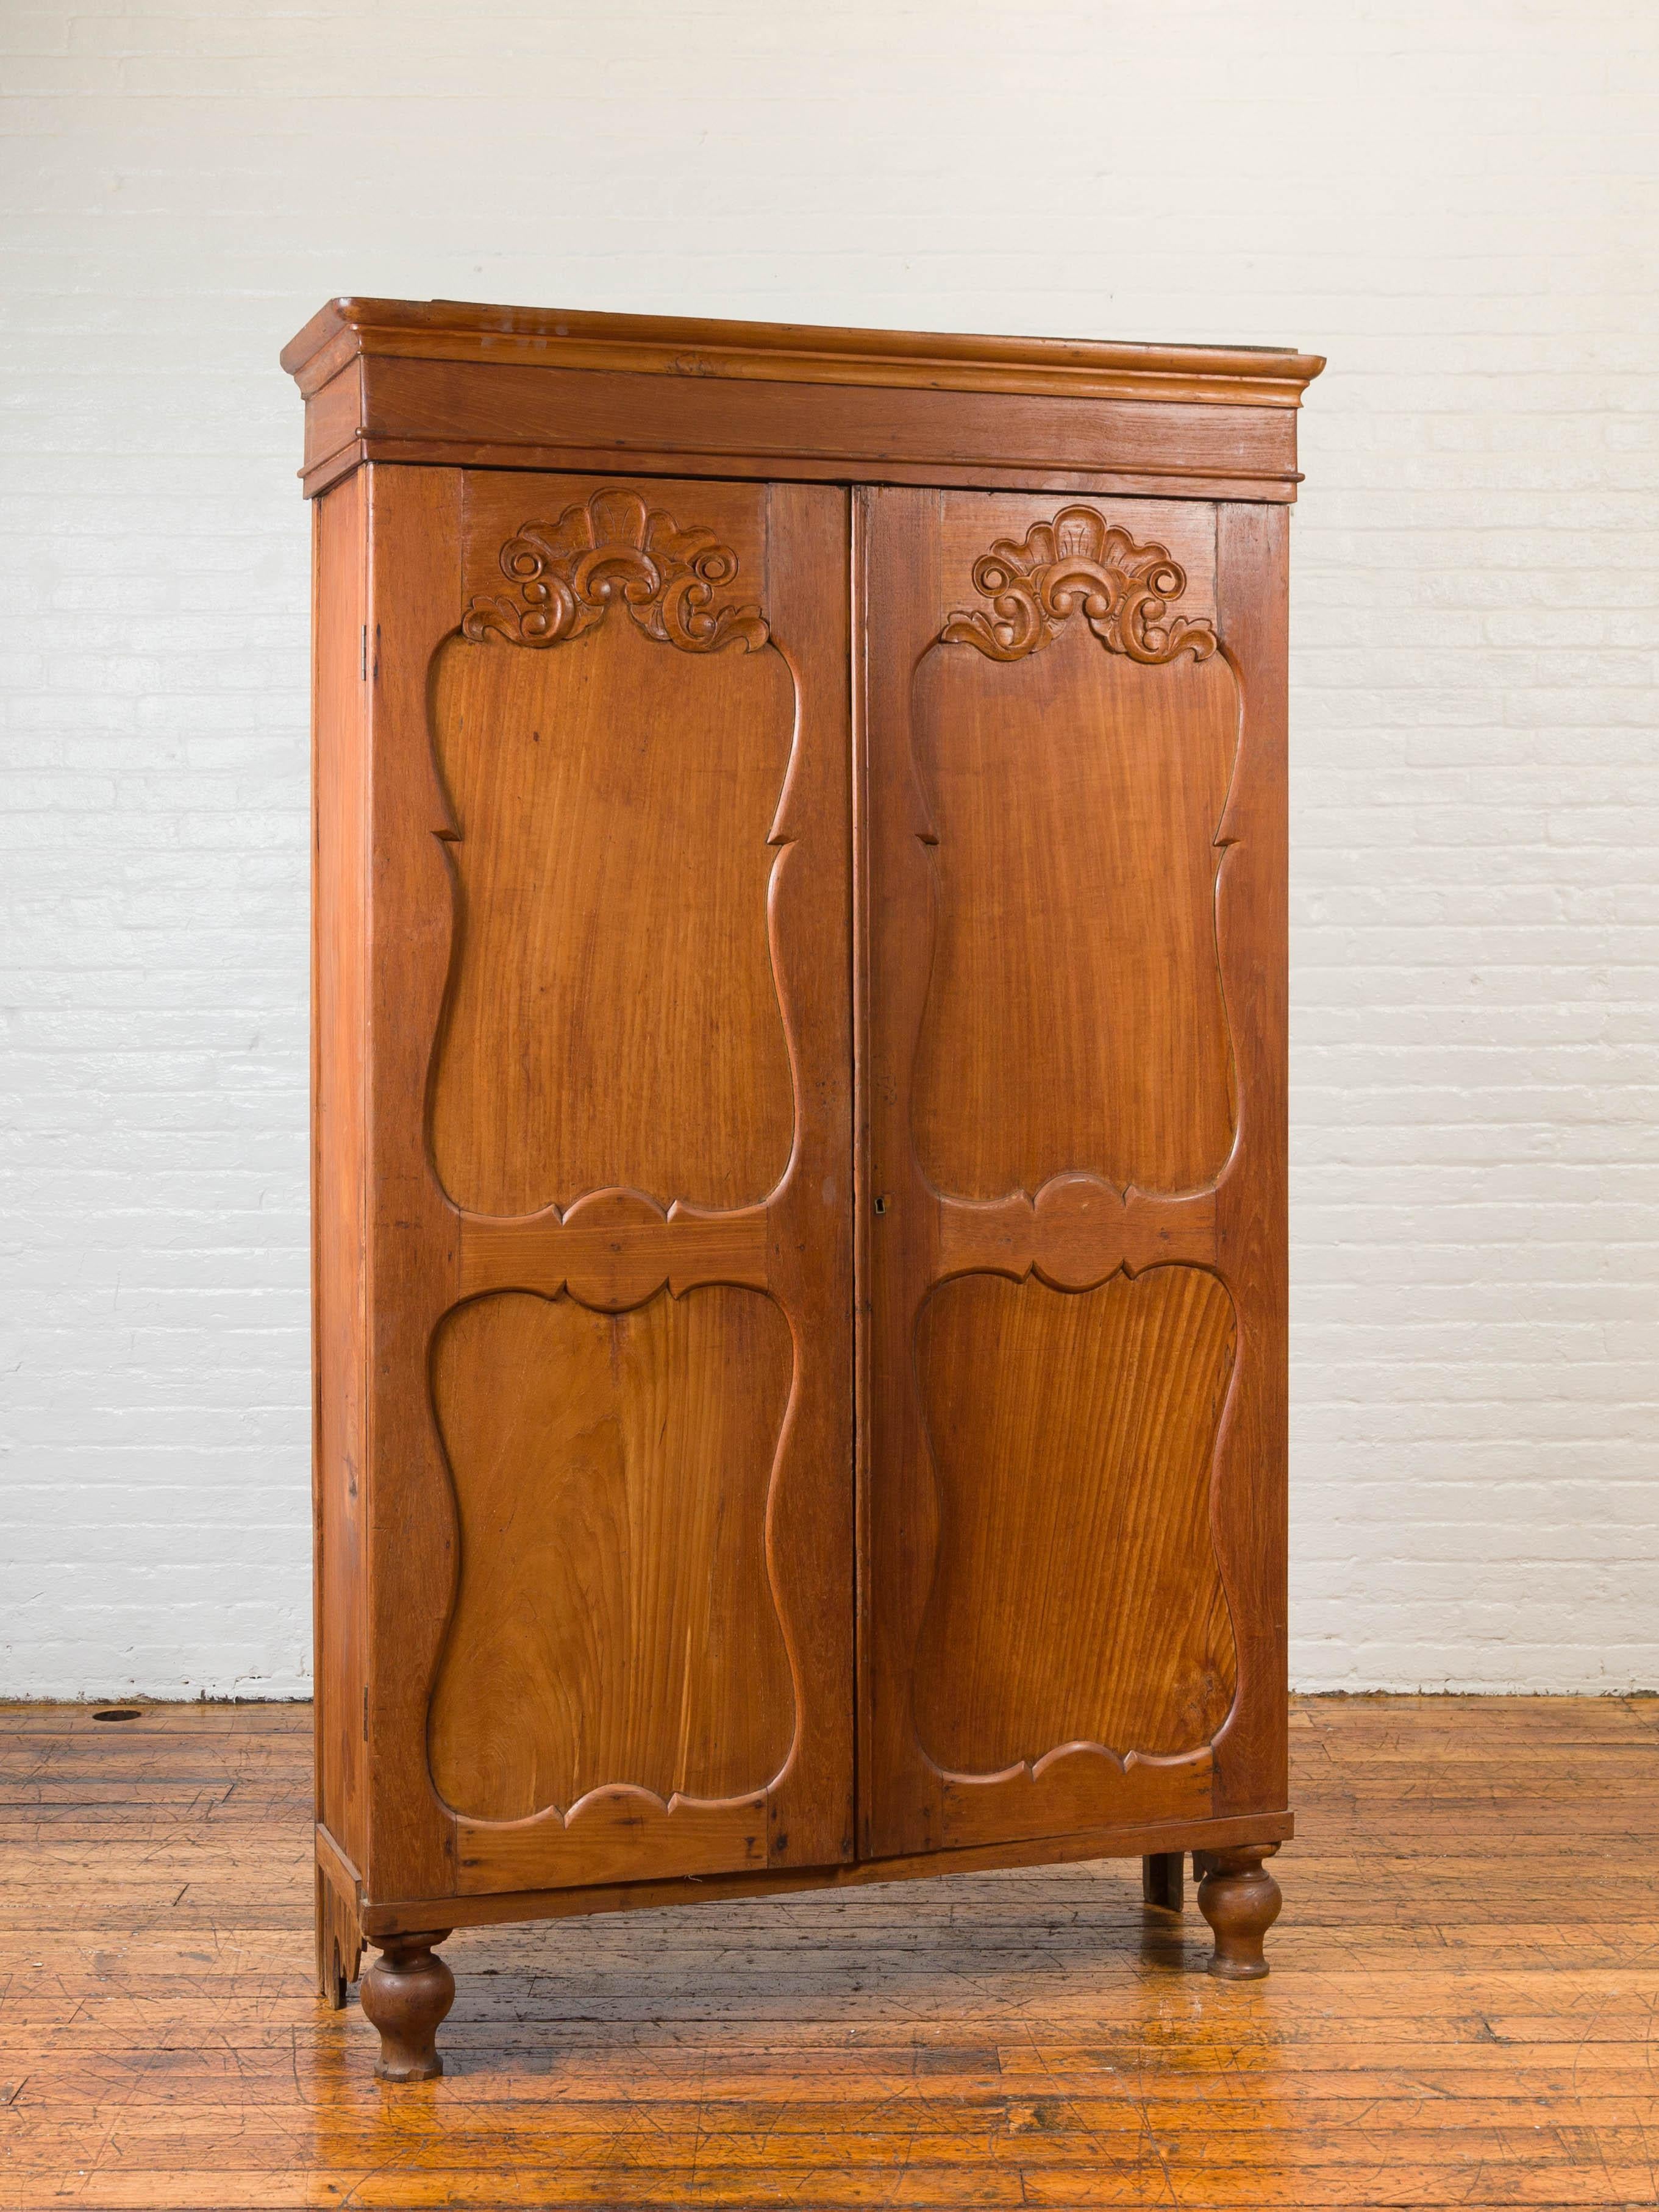 Dutch Colonial 19th Century Teak Wood Cabinet with Carved Panels and Shelves For Sale 3